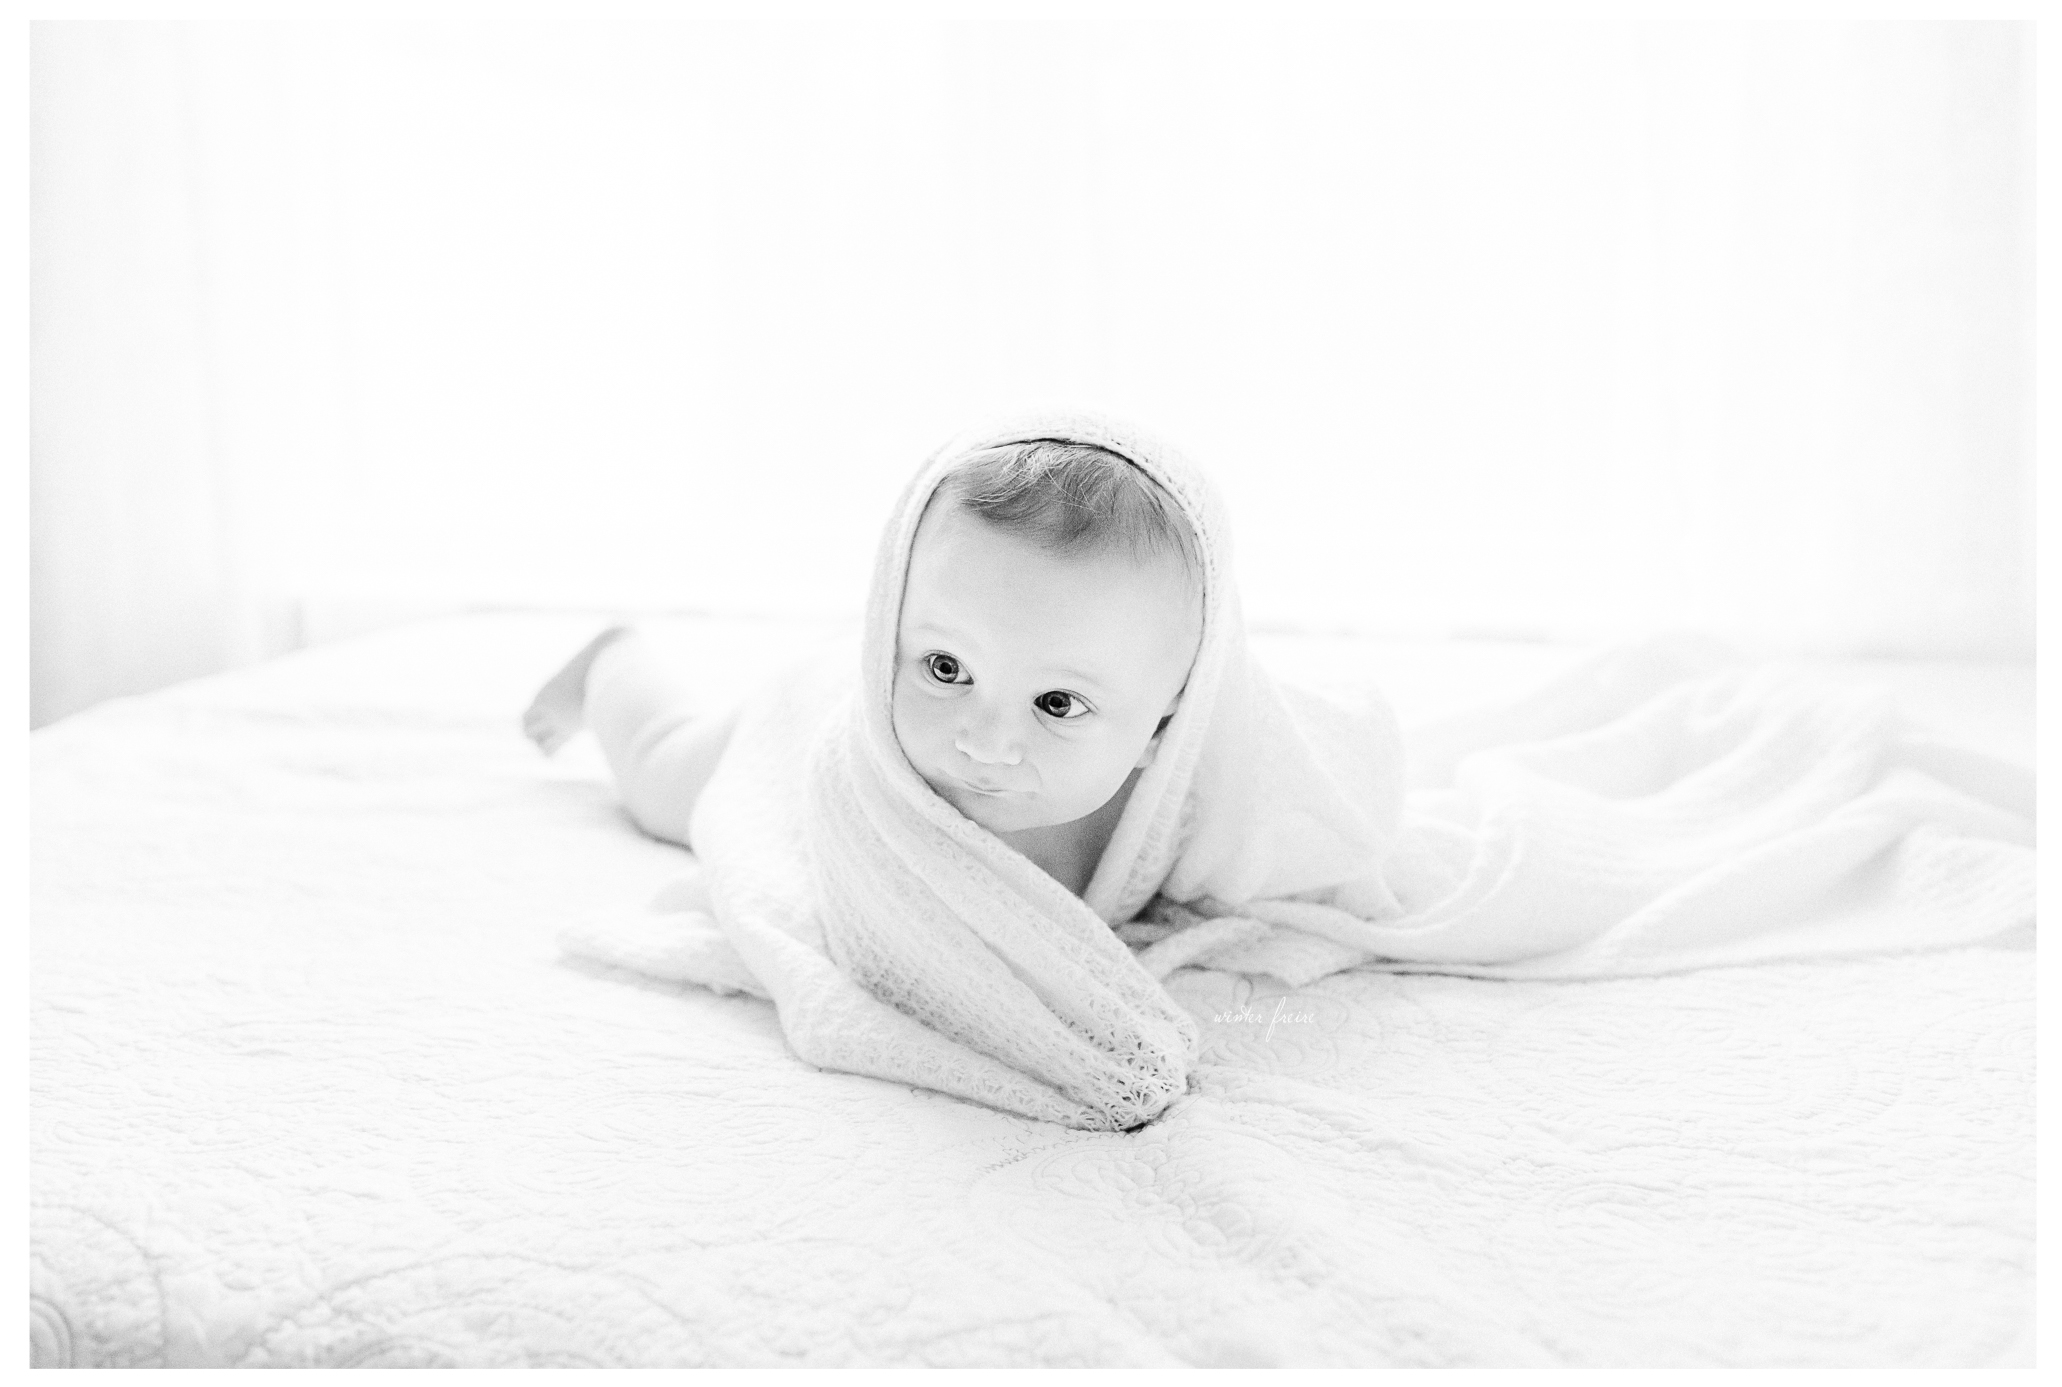 Winter Freire Photography | Milestone Session | Sweet Pure Organic Portraits | Dayton, Ohio Baby Photography | Natural Light | Fine Art Baby Photography | Tiny Blossoms Collective